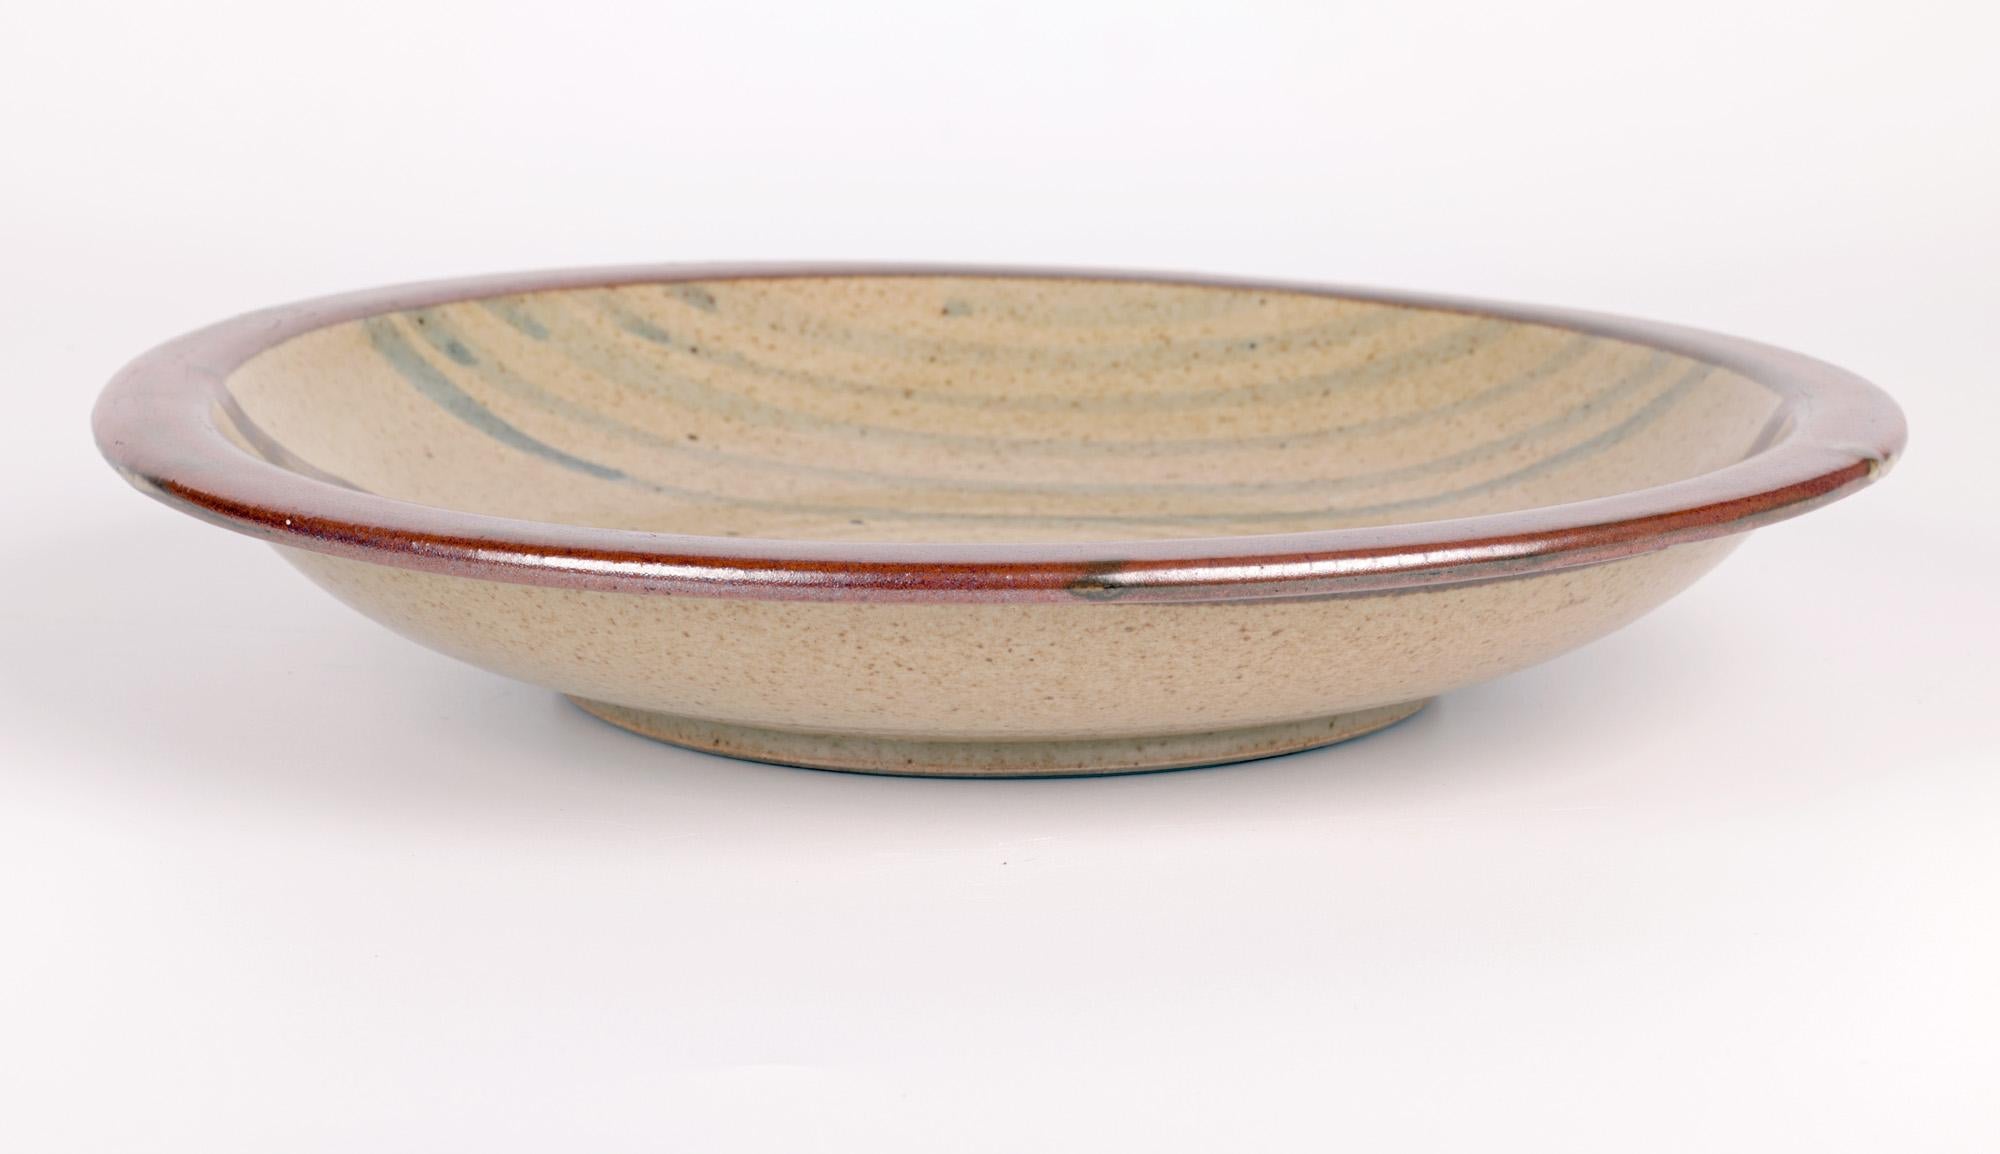 A large and impressive Leach Pottery trailed design cake plate made at St Ives, Cornwall and dating from the 20th century. This sought after plate is finely and heavily made standing on a narrow round unglazed foot with a raised rim with a shaped